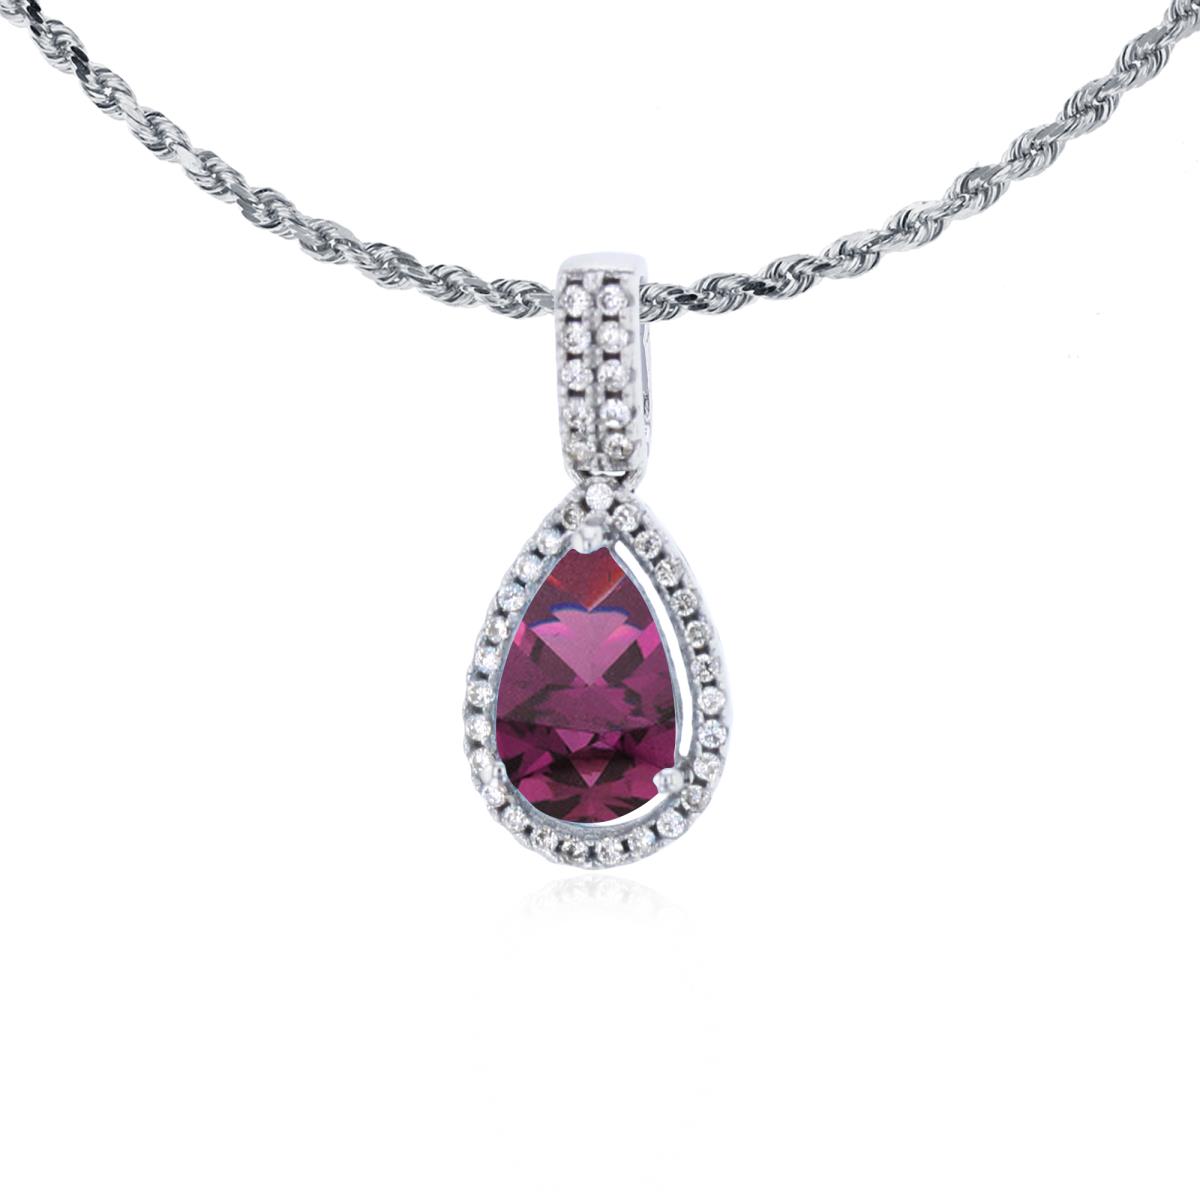 10K White Gold 8x5mm Pear Cut Rhodolite & 0.11 CTTW Diamond Halo 18" Rope Chain Necklace